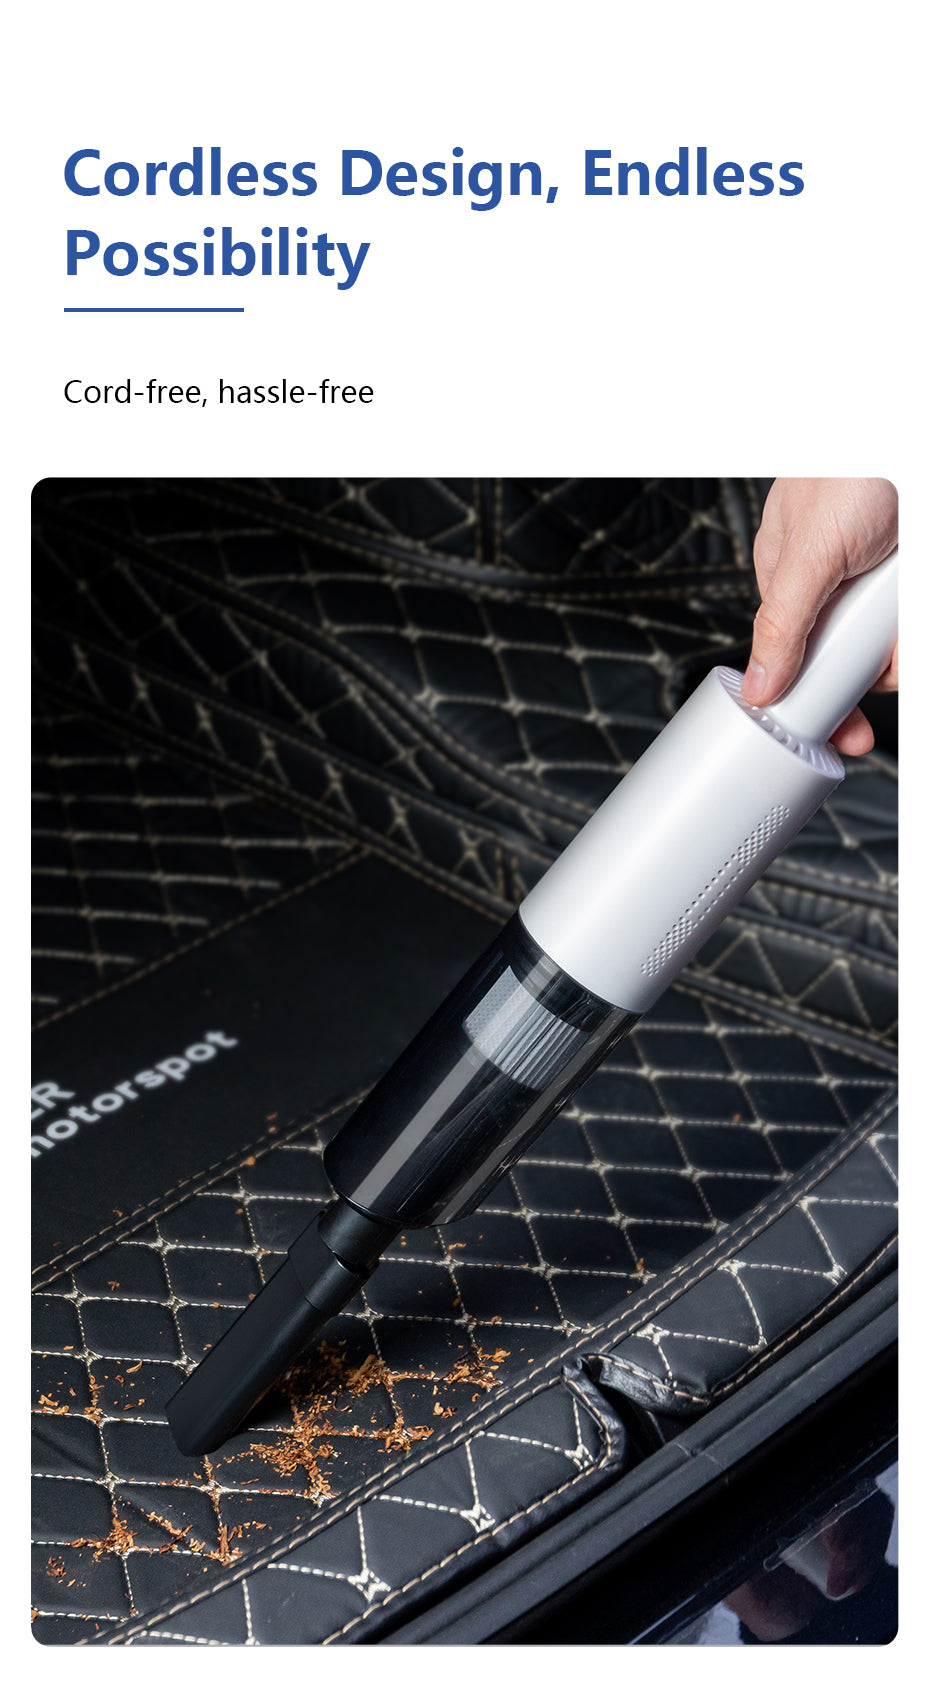 wireless car vacuum cleaner mini handheld for car home dual-use high-power strong Cyclone  suction and easy to carry Portable